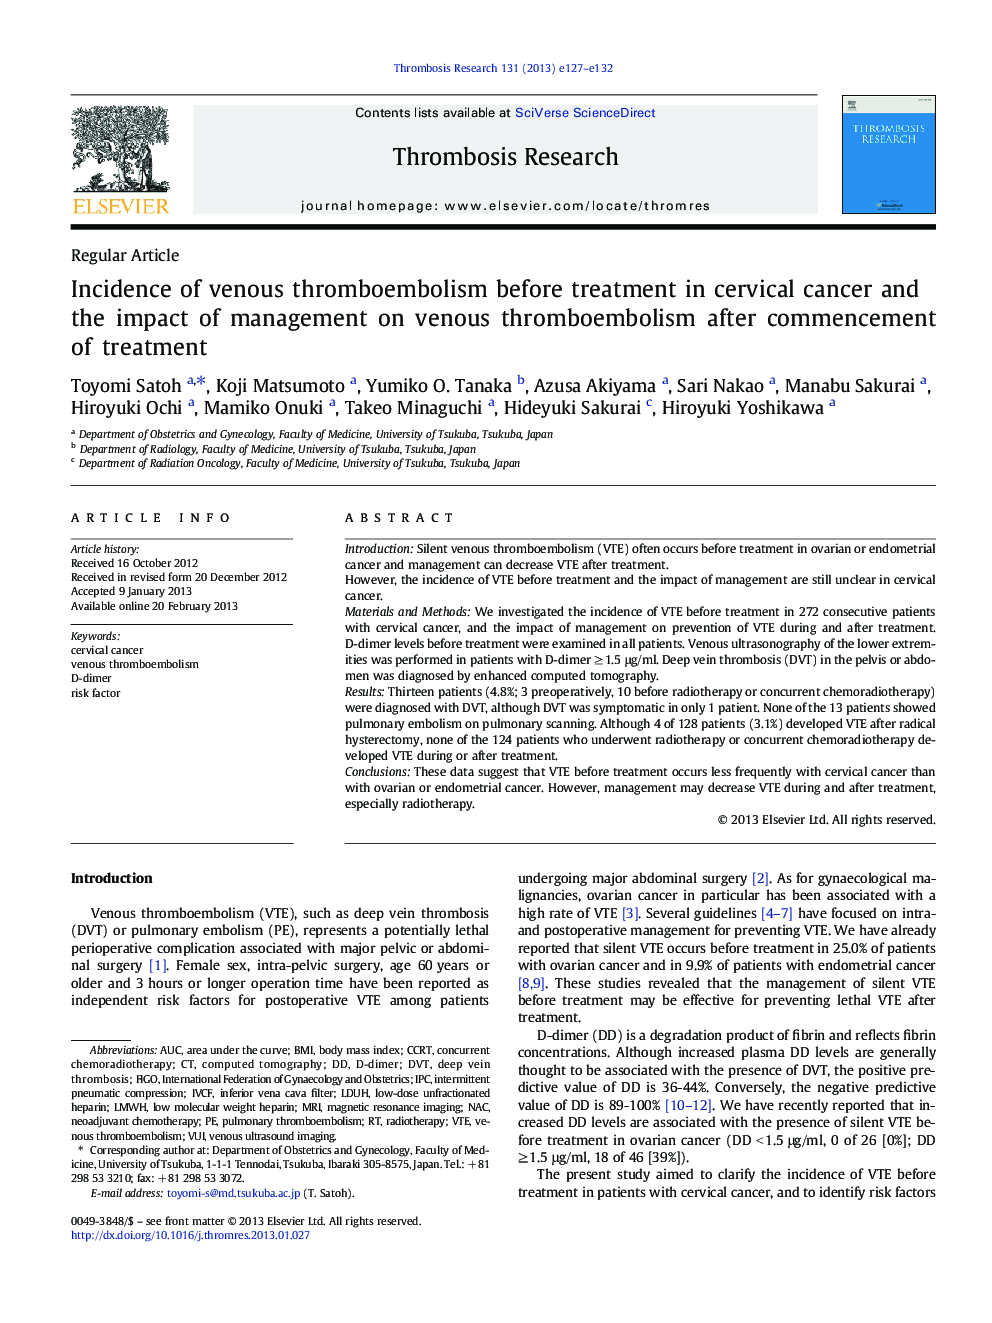 Incidence of venous thromboembolism before treatment in cervical cancer and the impact of management on venous thromboembolism after commencement of treatment